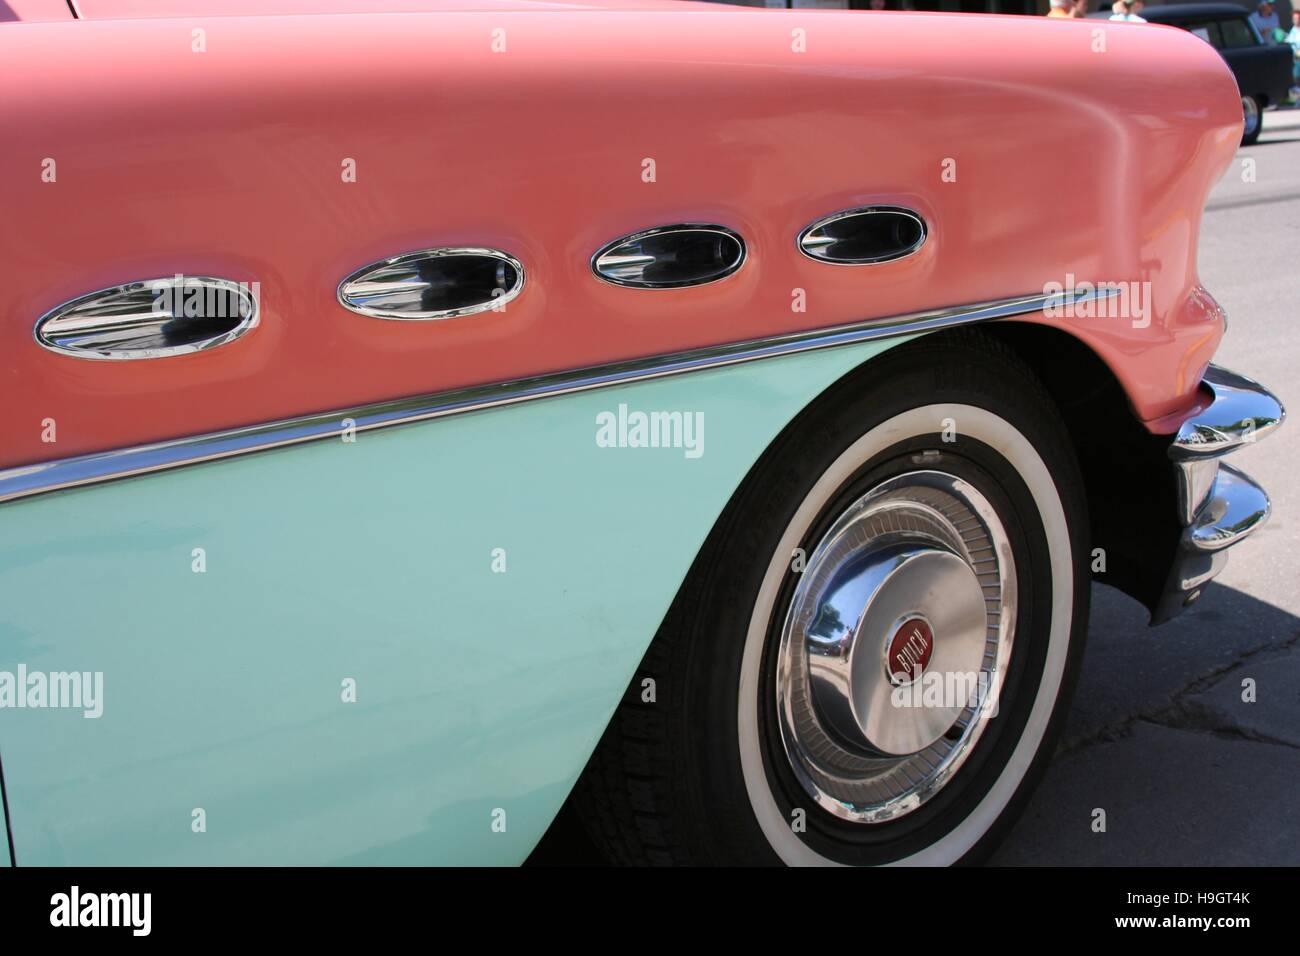 Automotive detail of a fender on a 1956 coral pink and aqua green Buick Century Hardtop Stock Photo